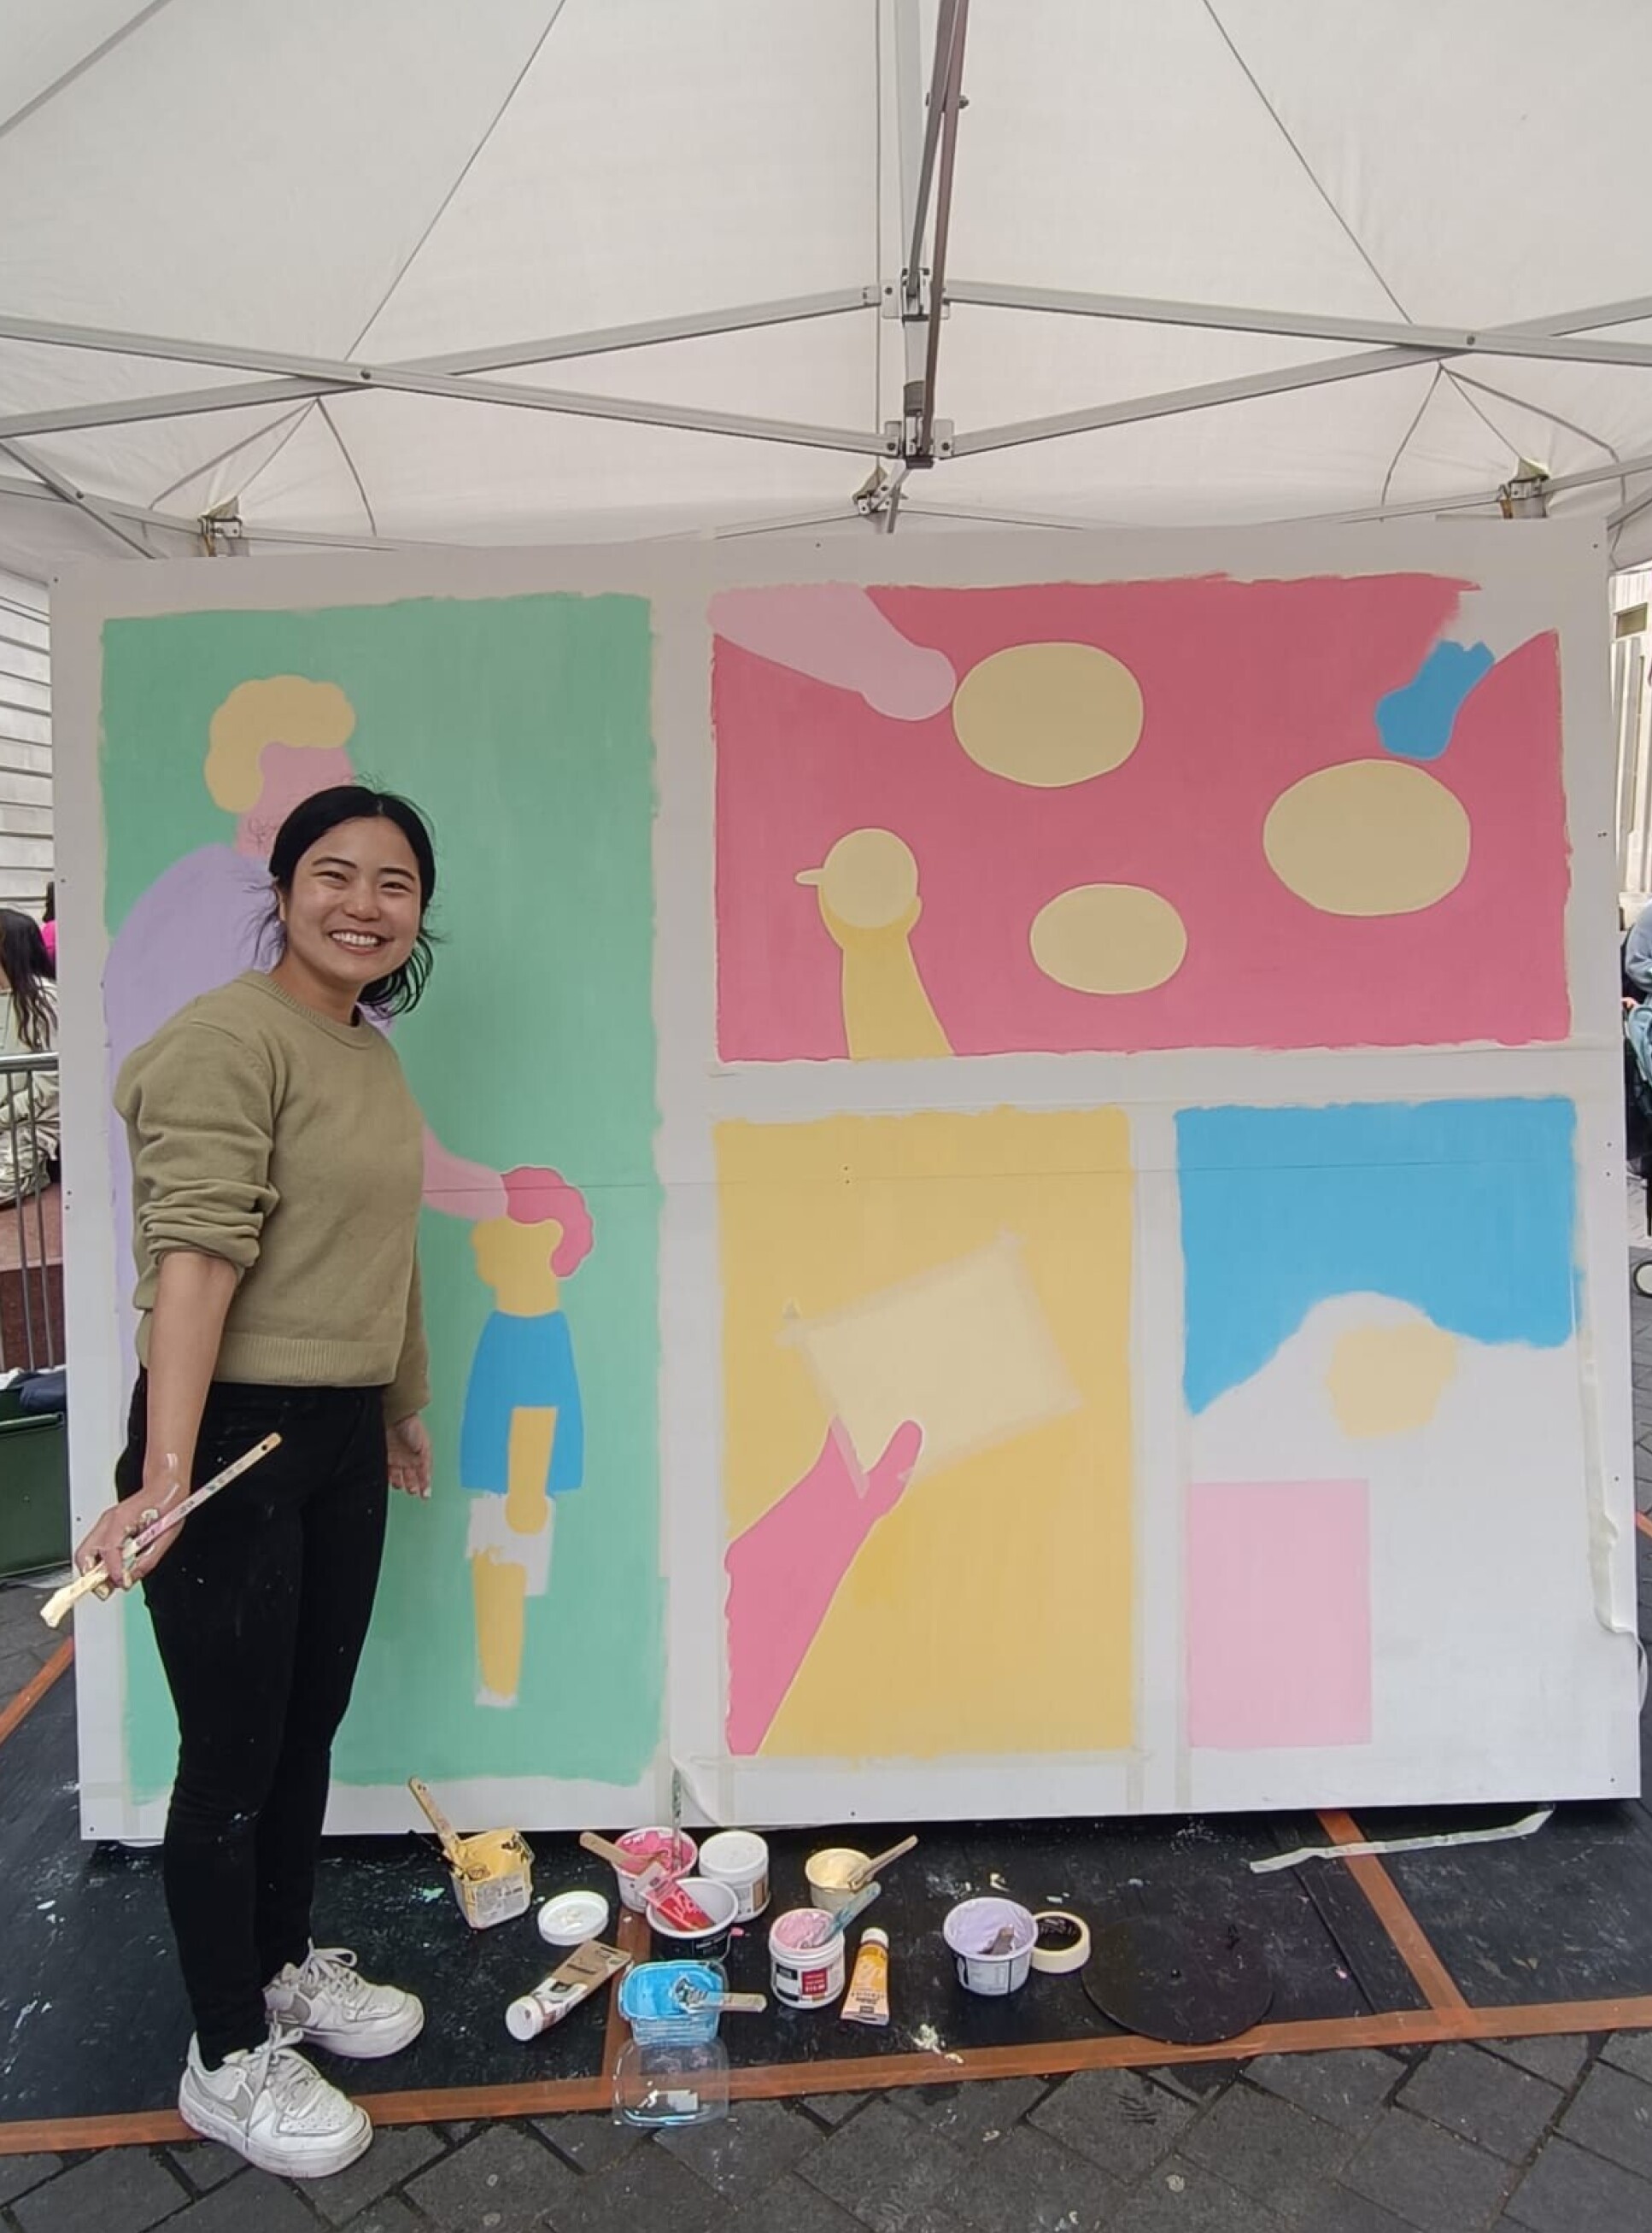 Artist SHIO next to her mural painting inspired by the Helix Centre’s Healthy Ageing project